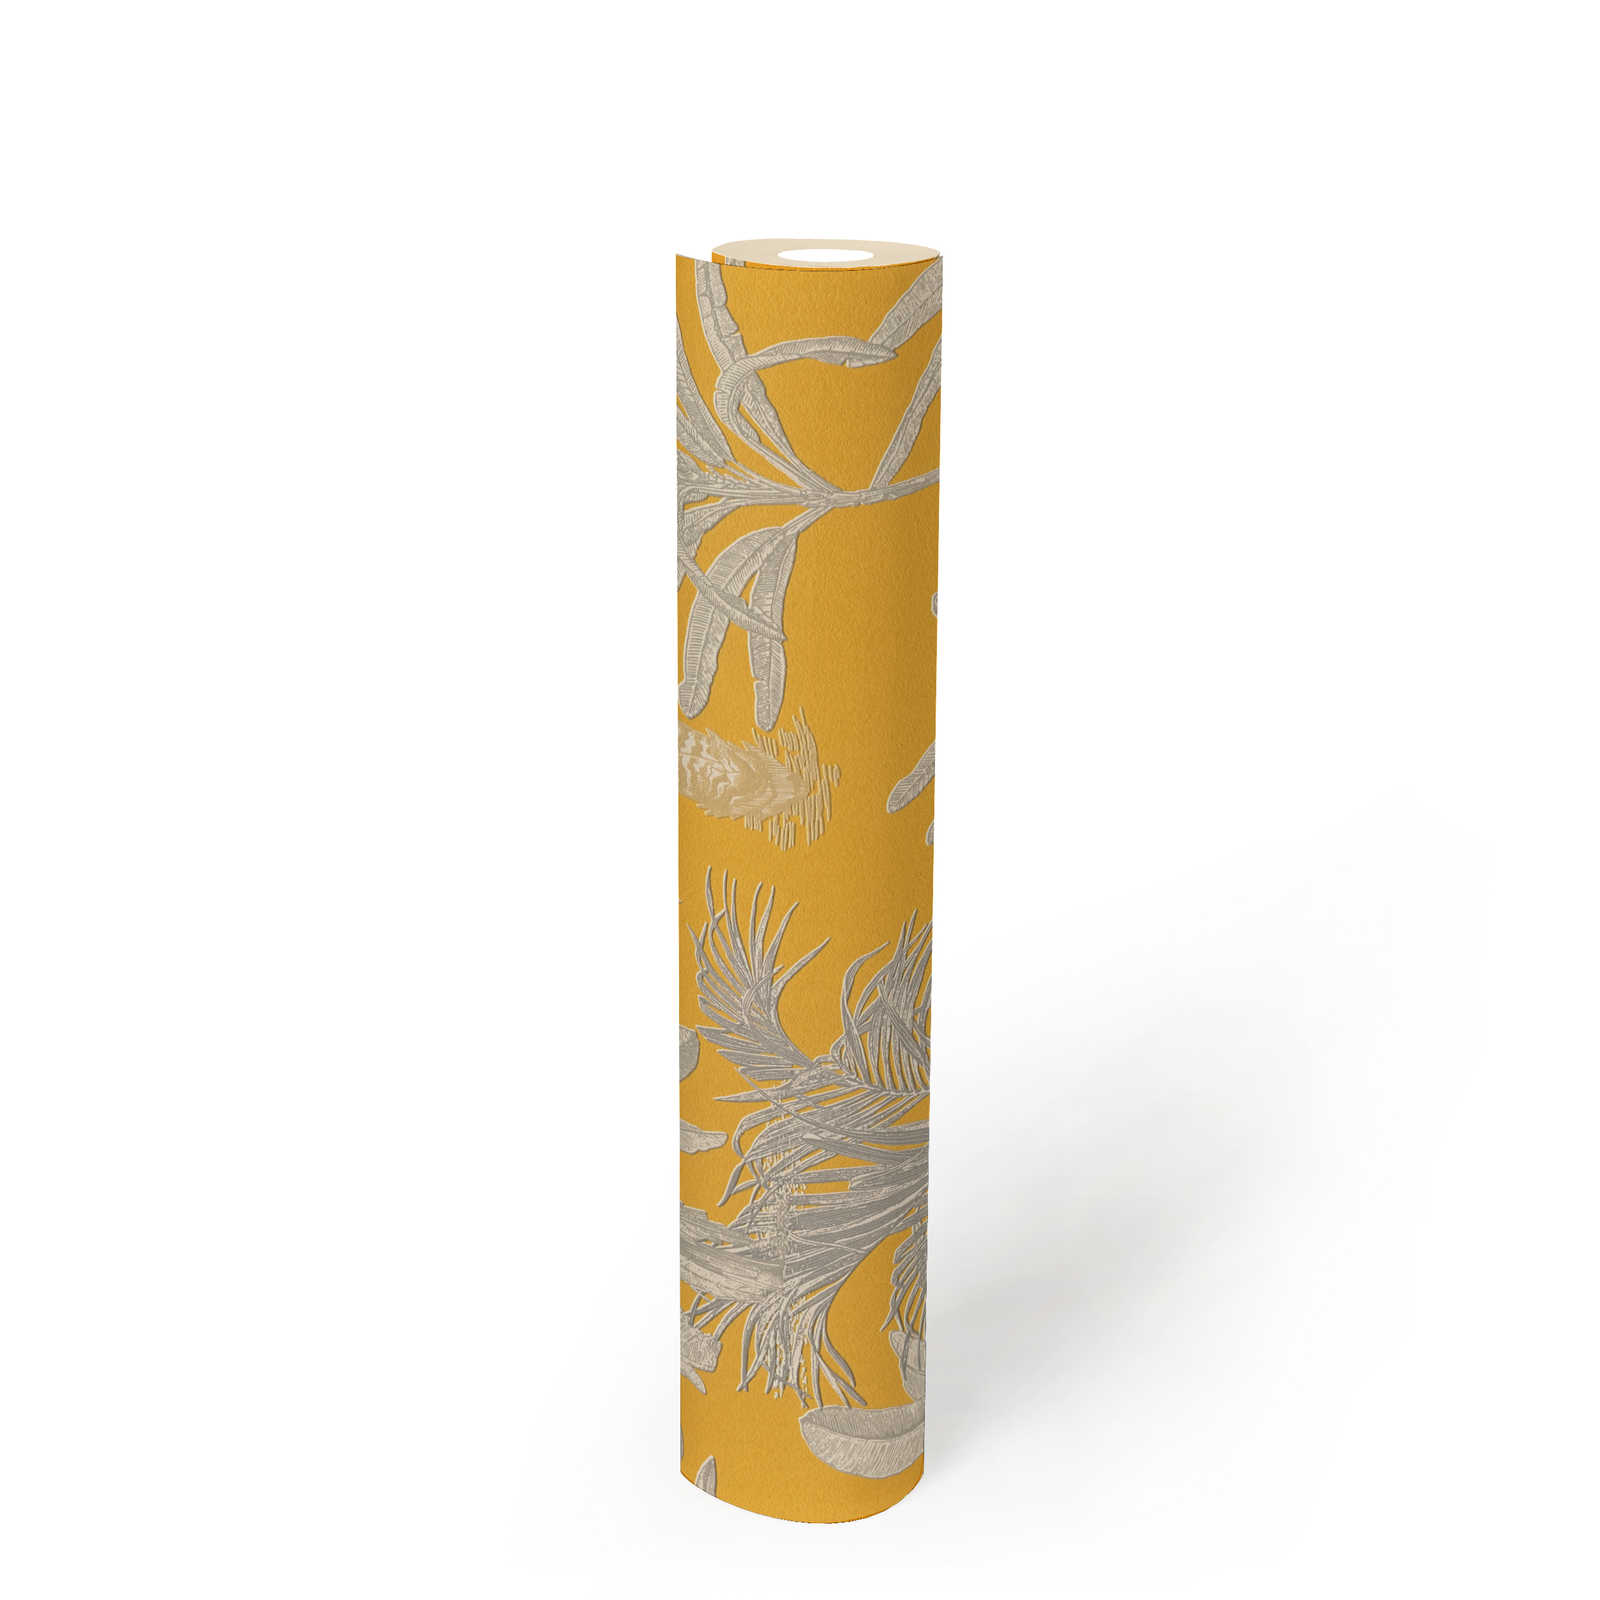             Palm wallpaper mustard yellow with textured pattern - yellow, grey
        